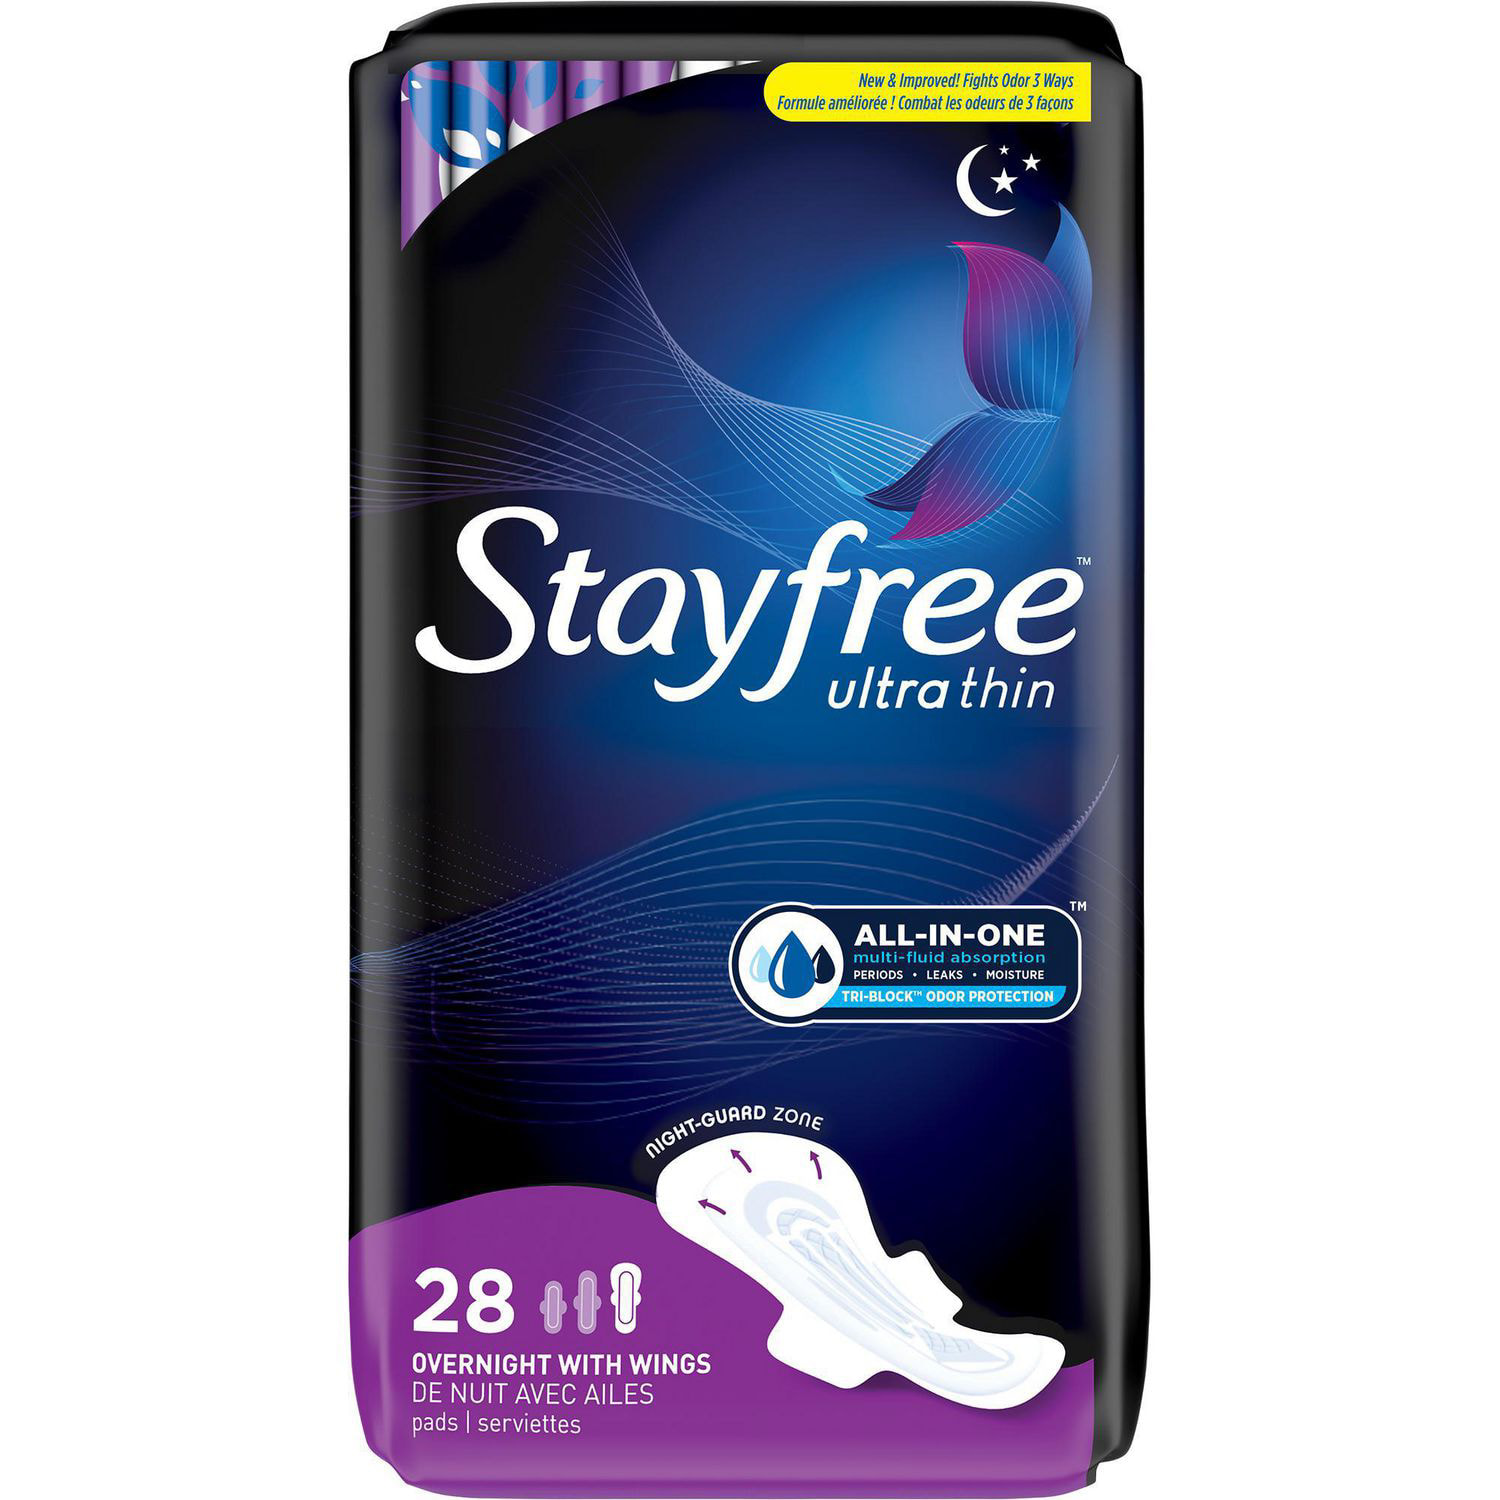 Stayfree® Ultra Thin Overnight Pads with Wings, 28 ultra thin pads